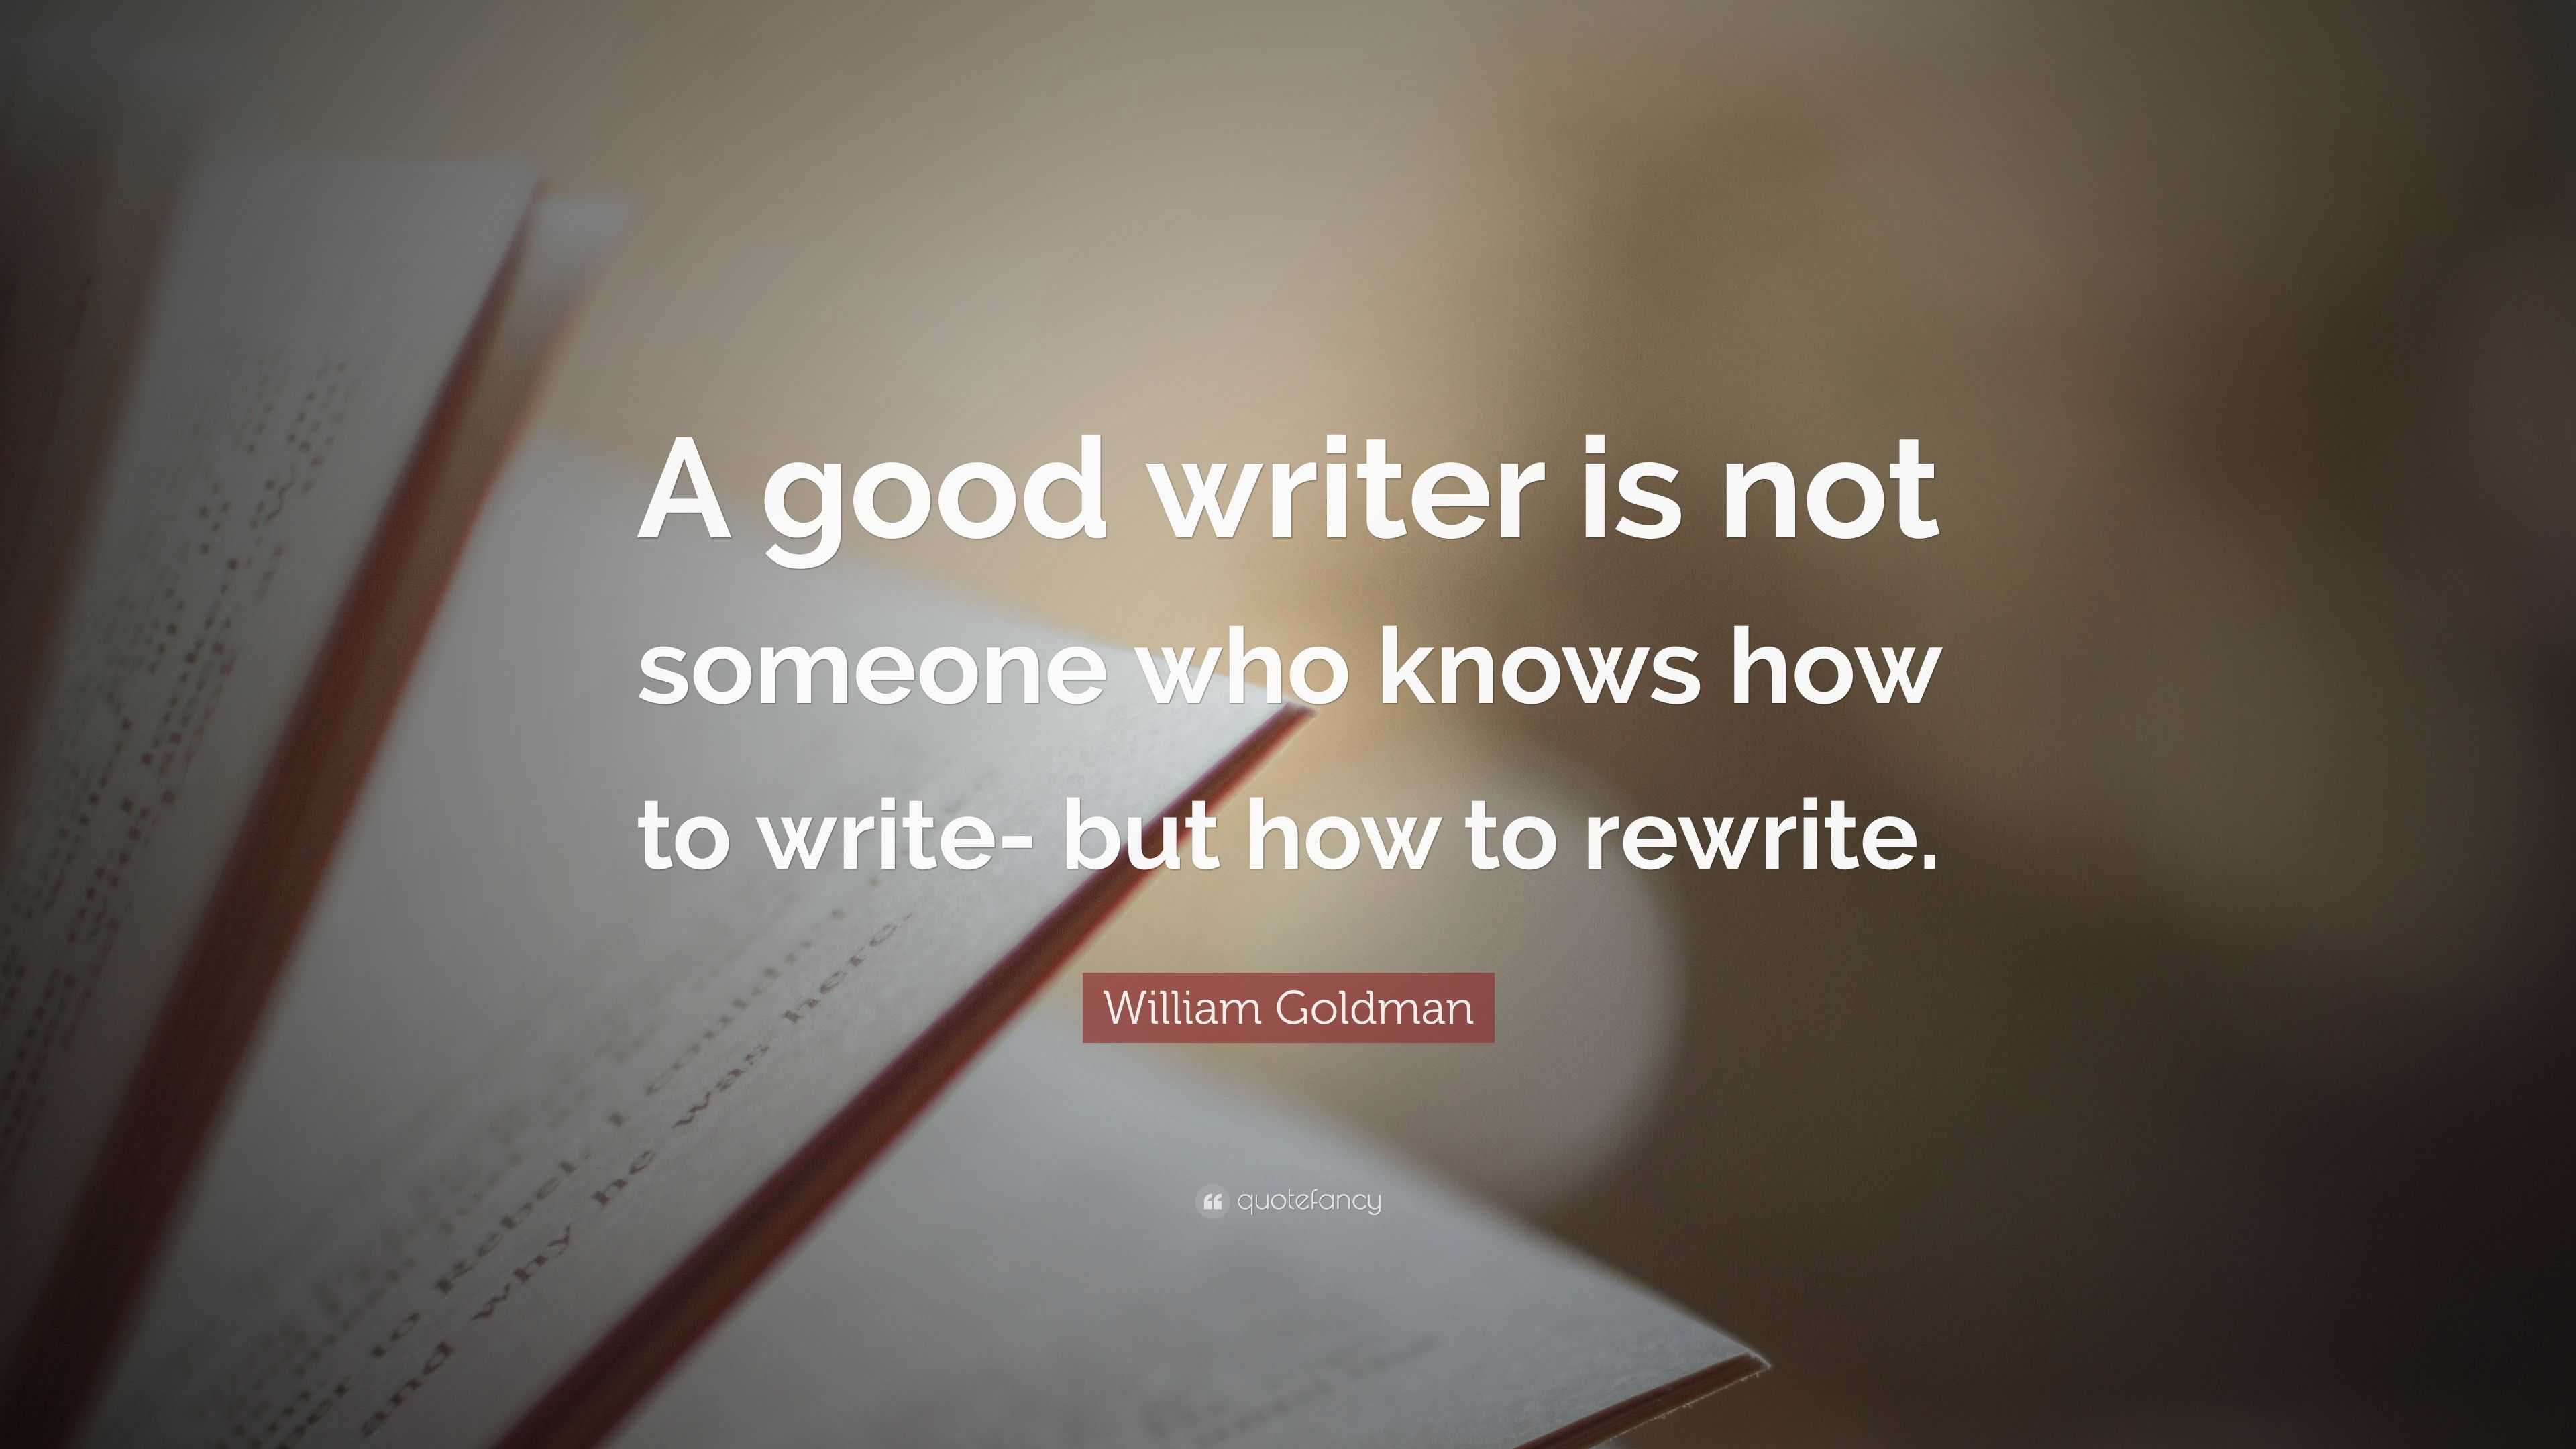 William Goldman Quote: “A good writer is not someone who knows how to ...